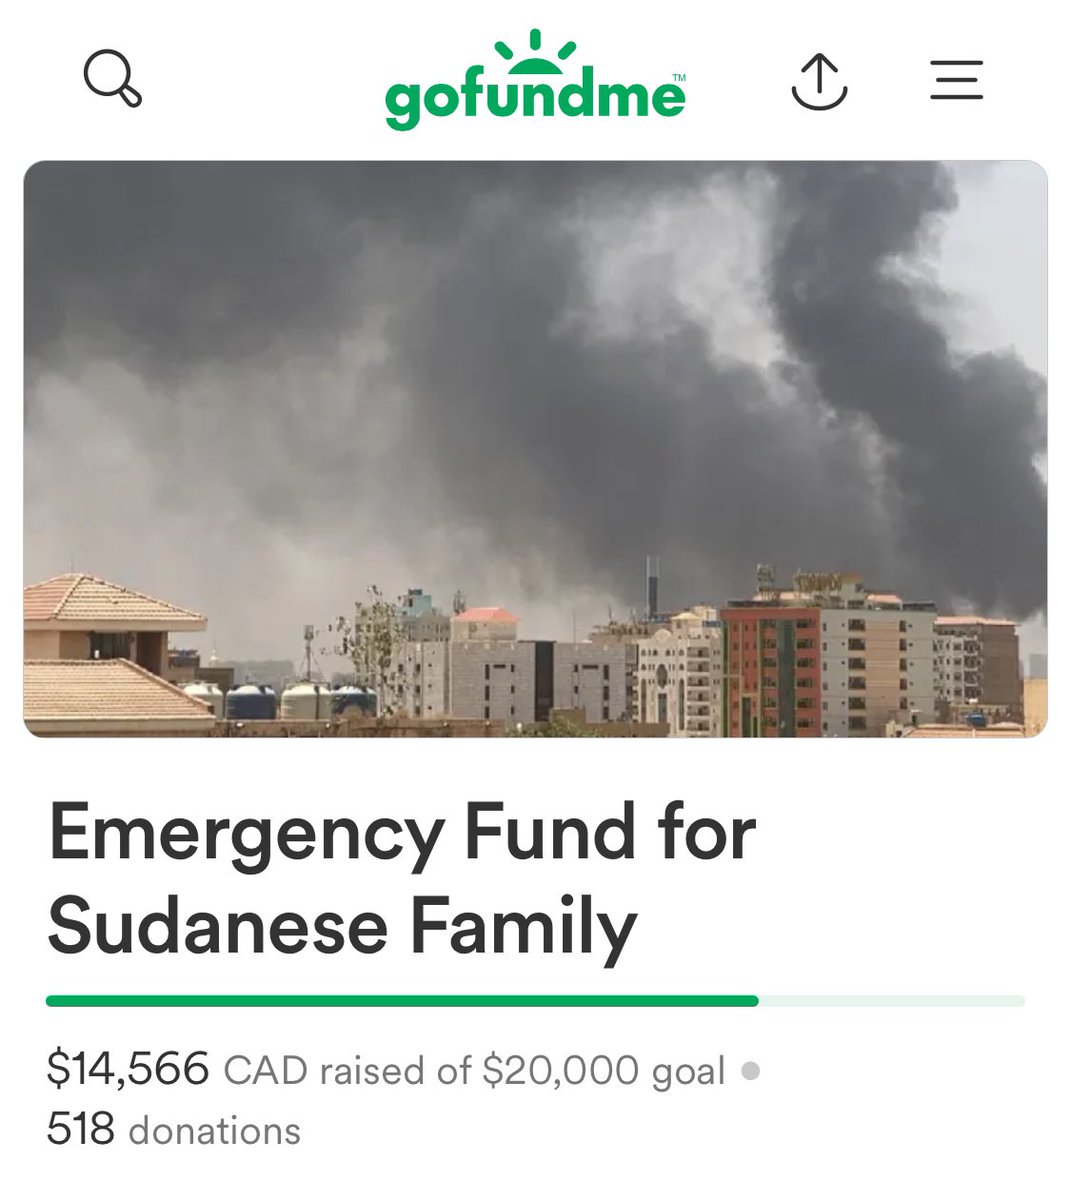 Want to support a Sudanese person affected by the war? This widow is carrying the backbreaking burden of supporting her family that has been displaced & dispossessed by the war. She’s less than $6K away from her goal. Who can help? gofund.me/f0d76db0 #KeepEyesOnSudan